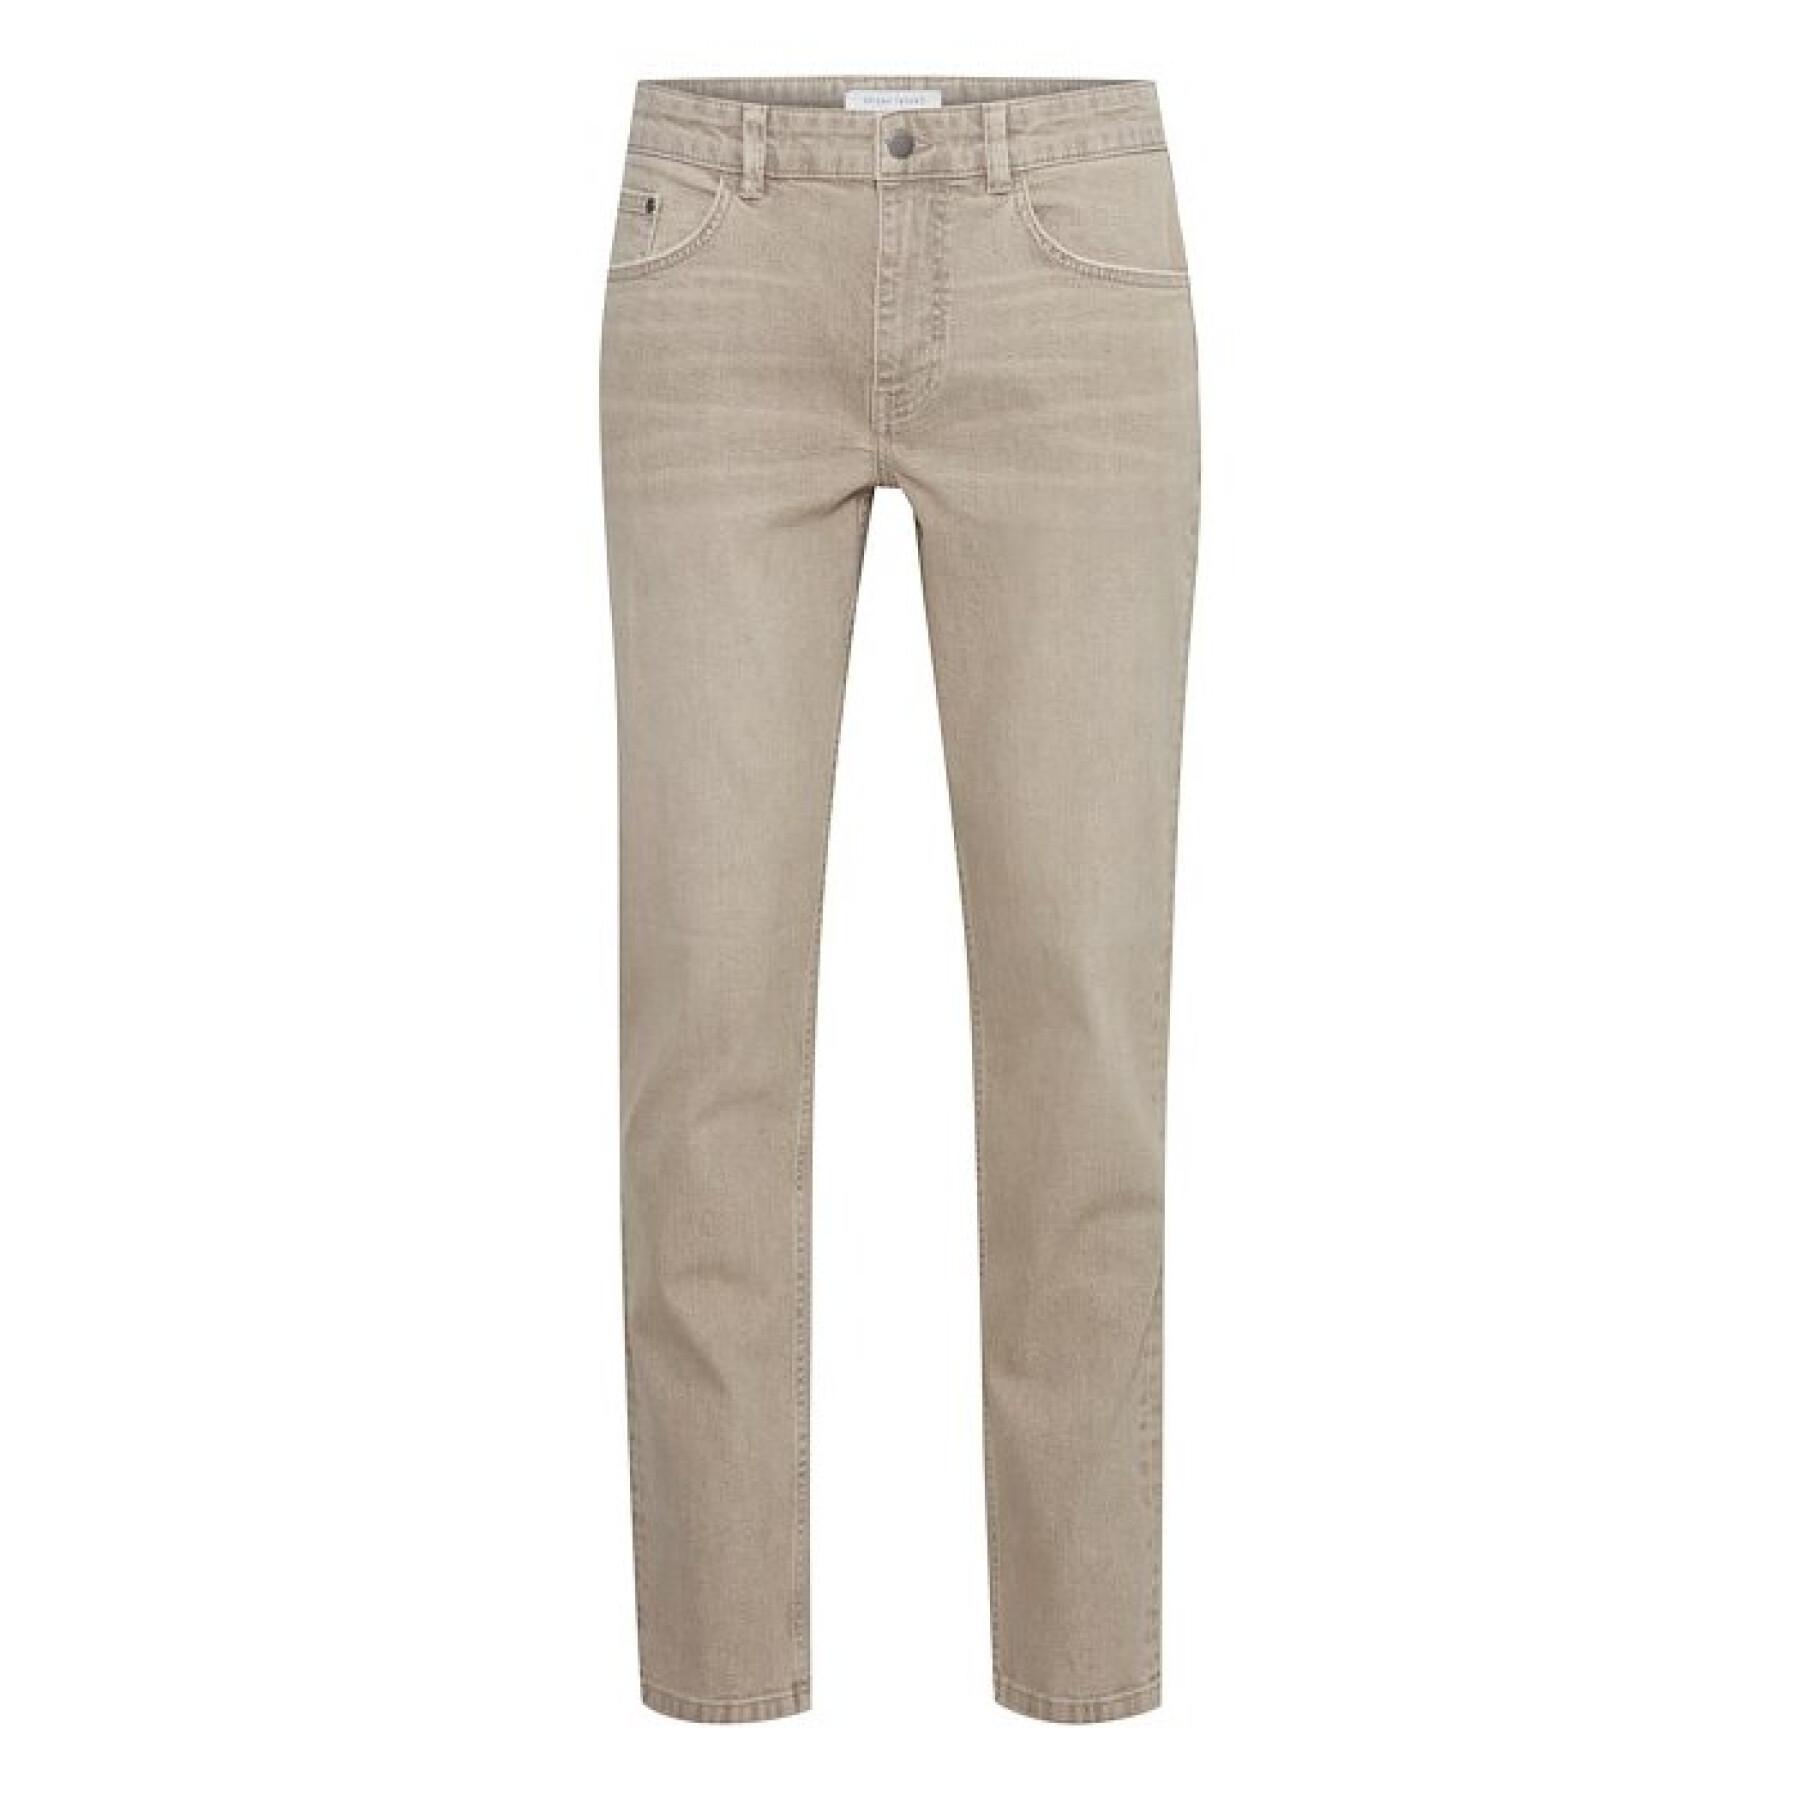 Jeans klei teint Casual Friday Karup 0061